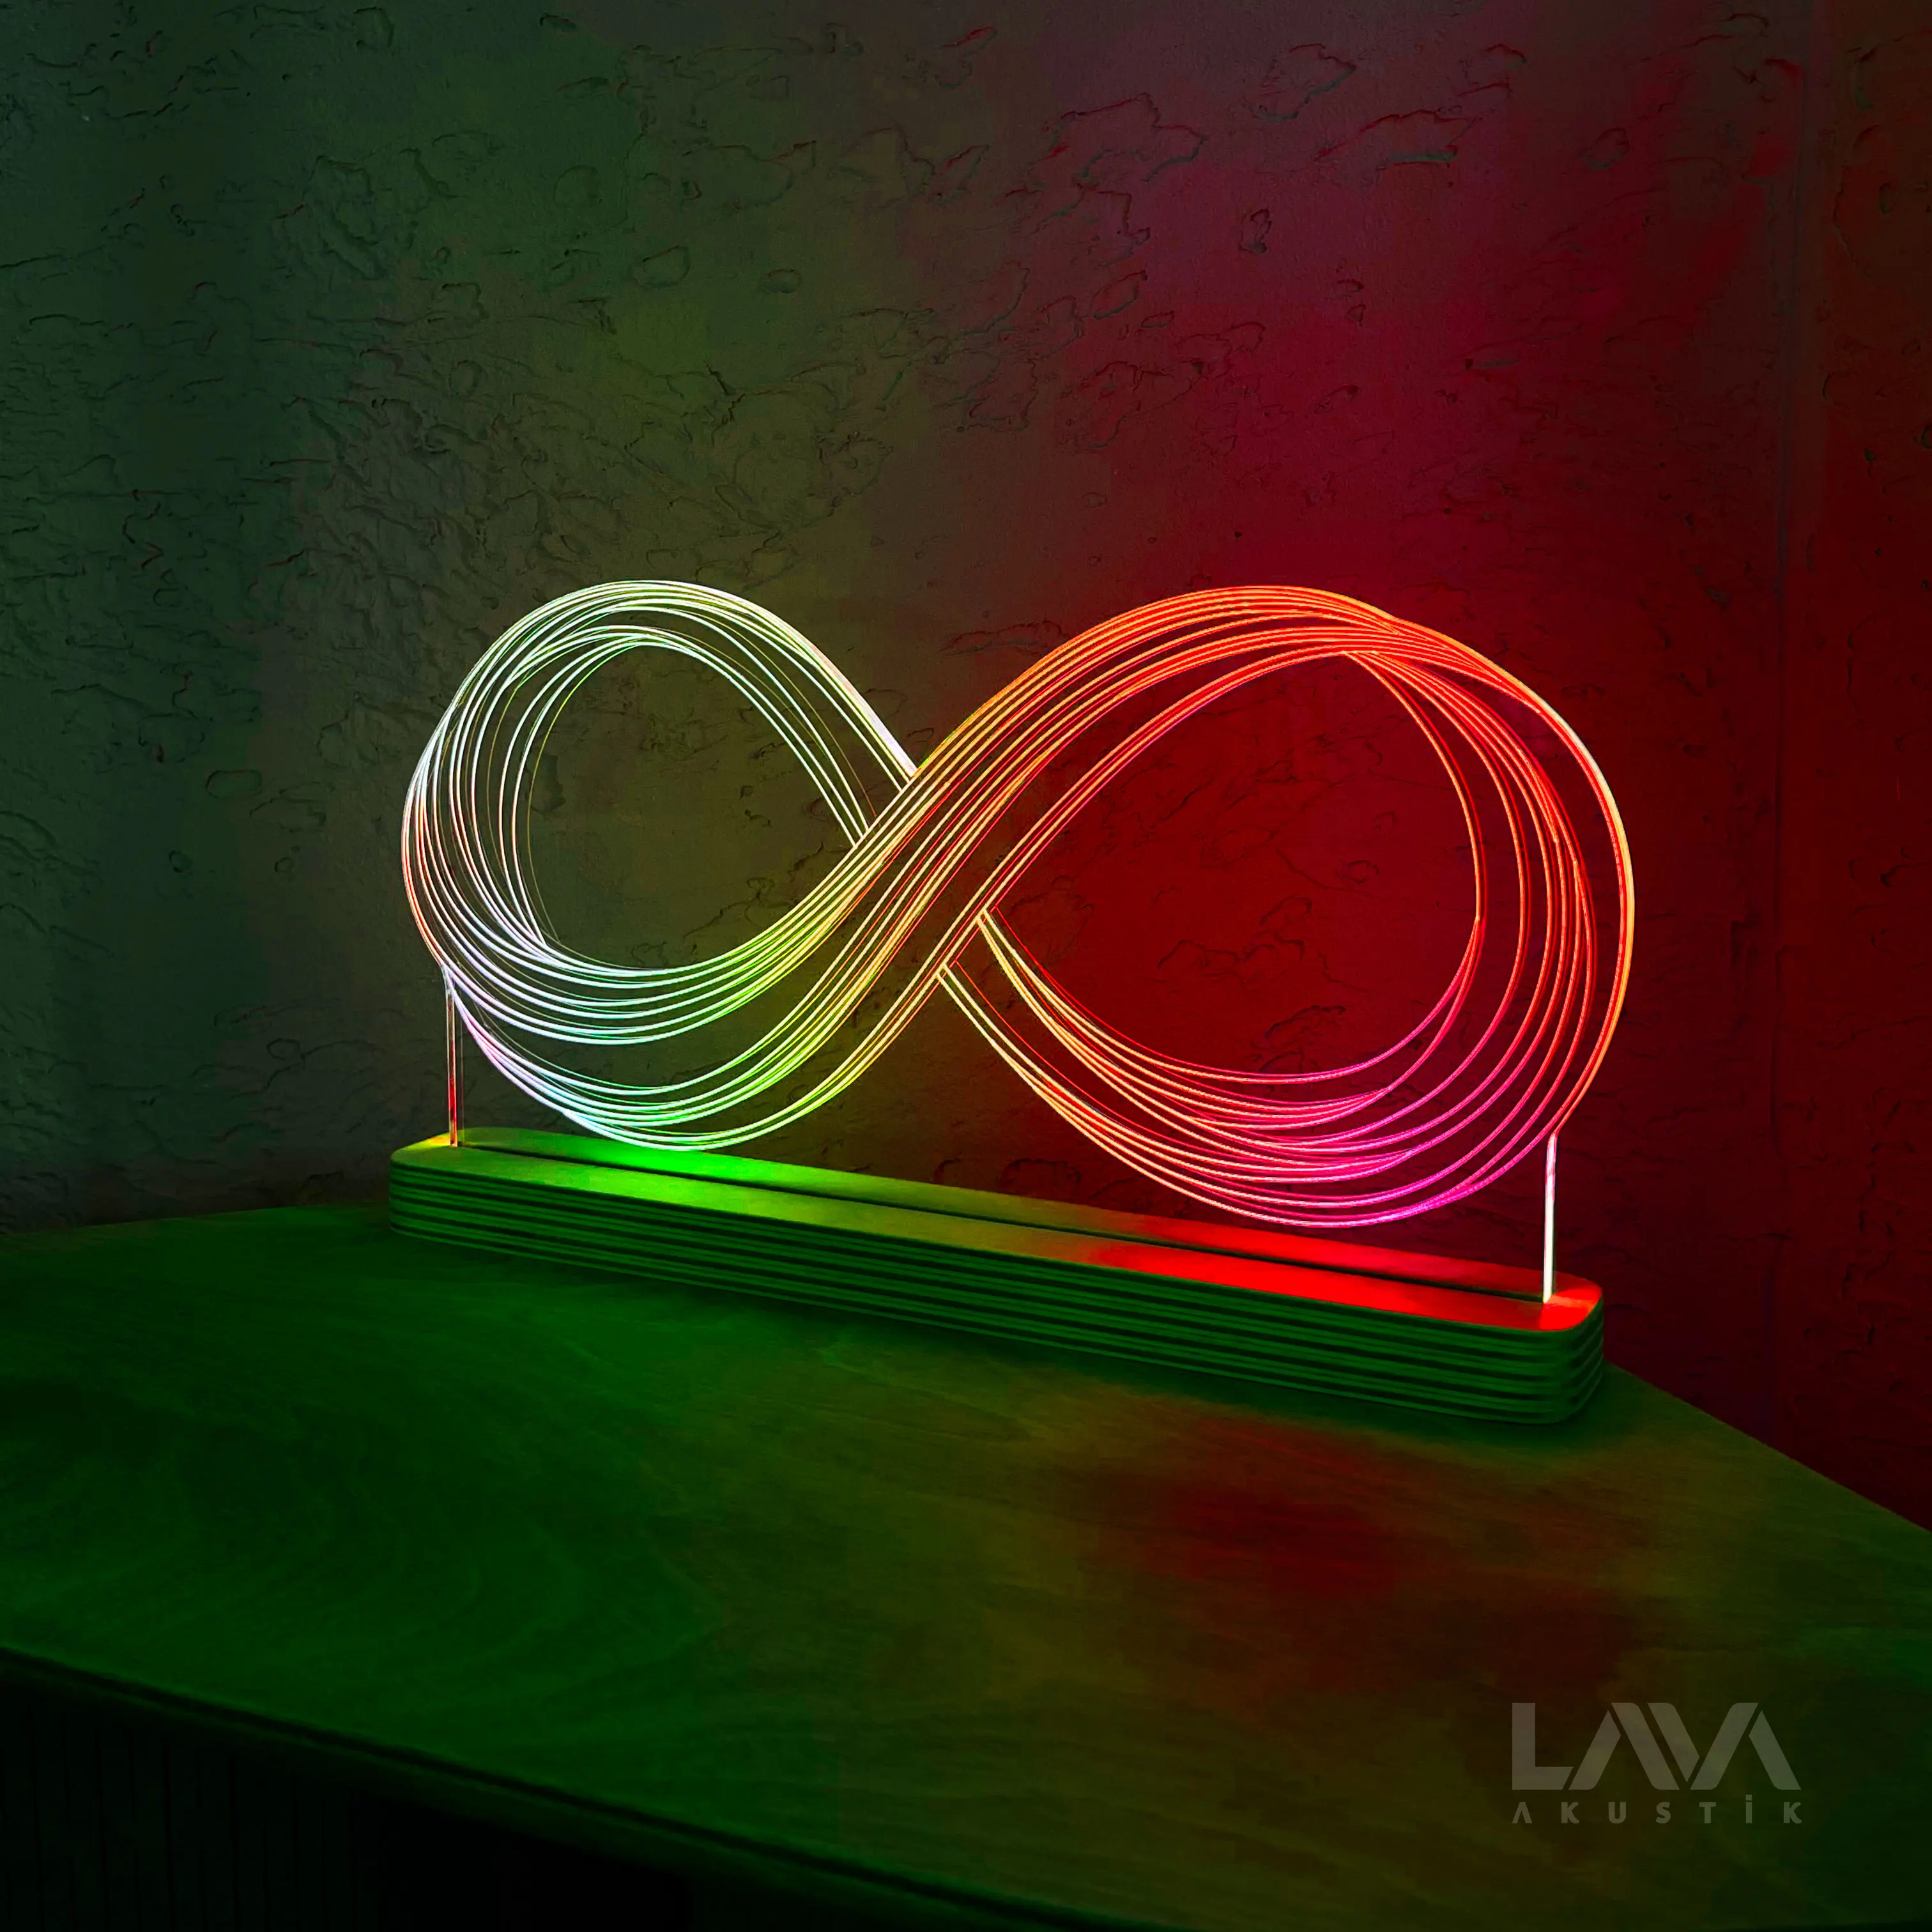 Infinity Endless Loop Forever Sign RGB LED Light USB Lamp Remote Full Animation Color Night Colour Rainbow Effect